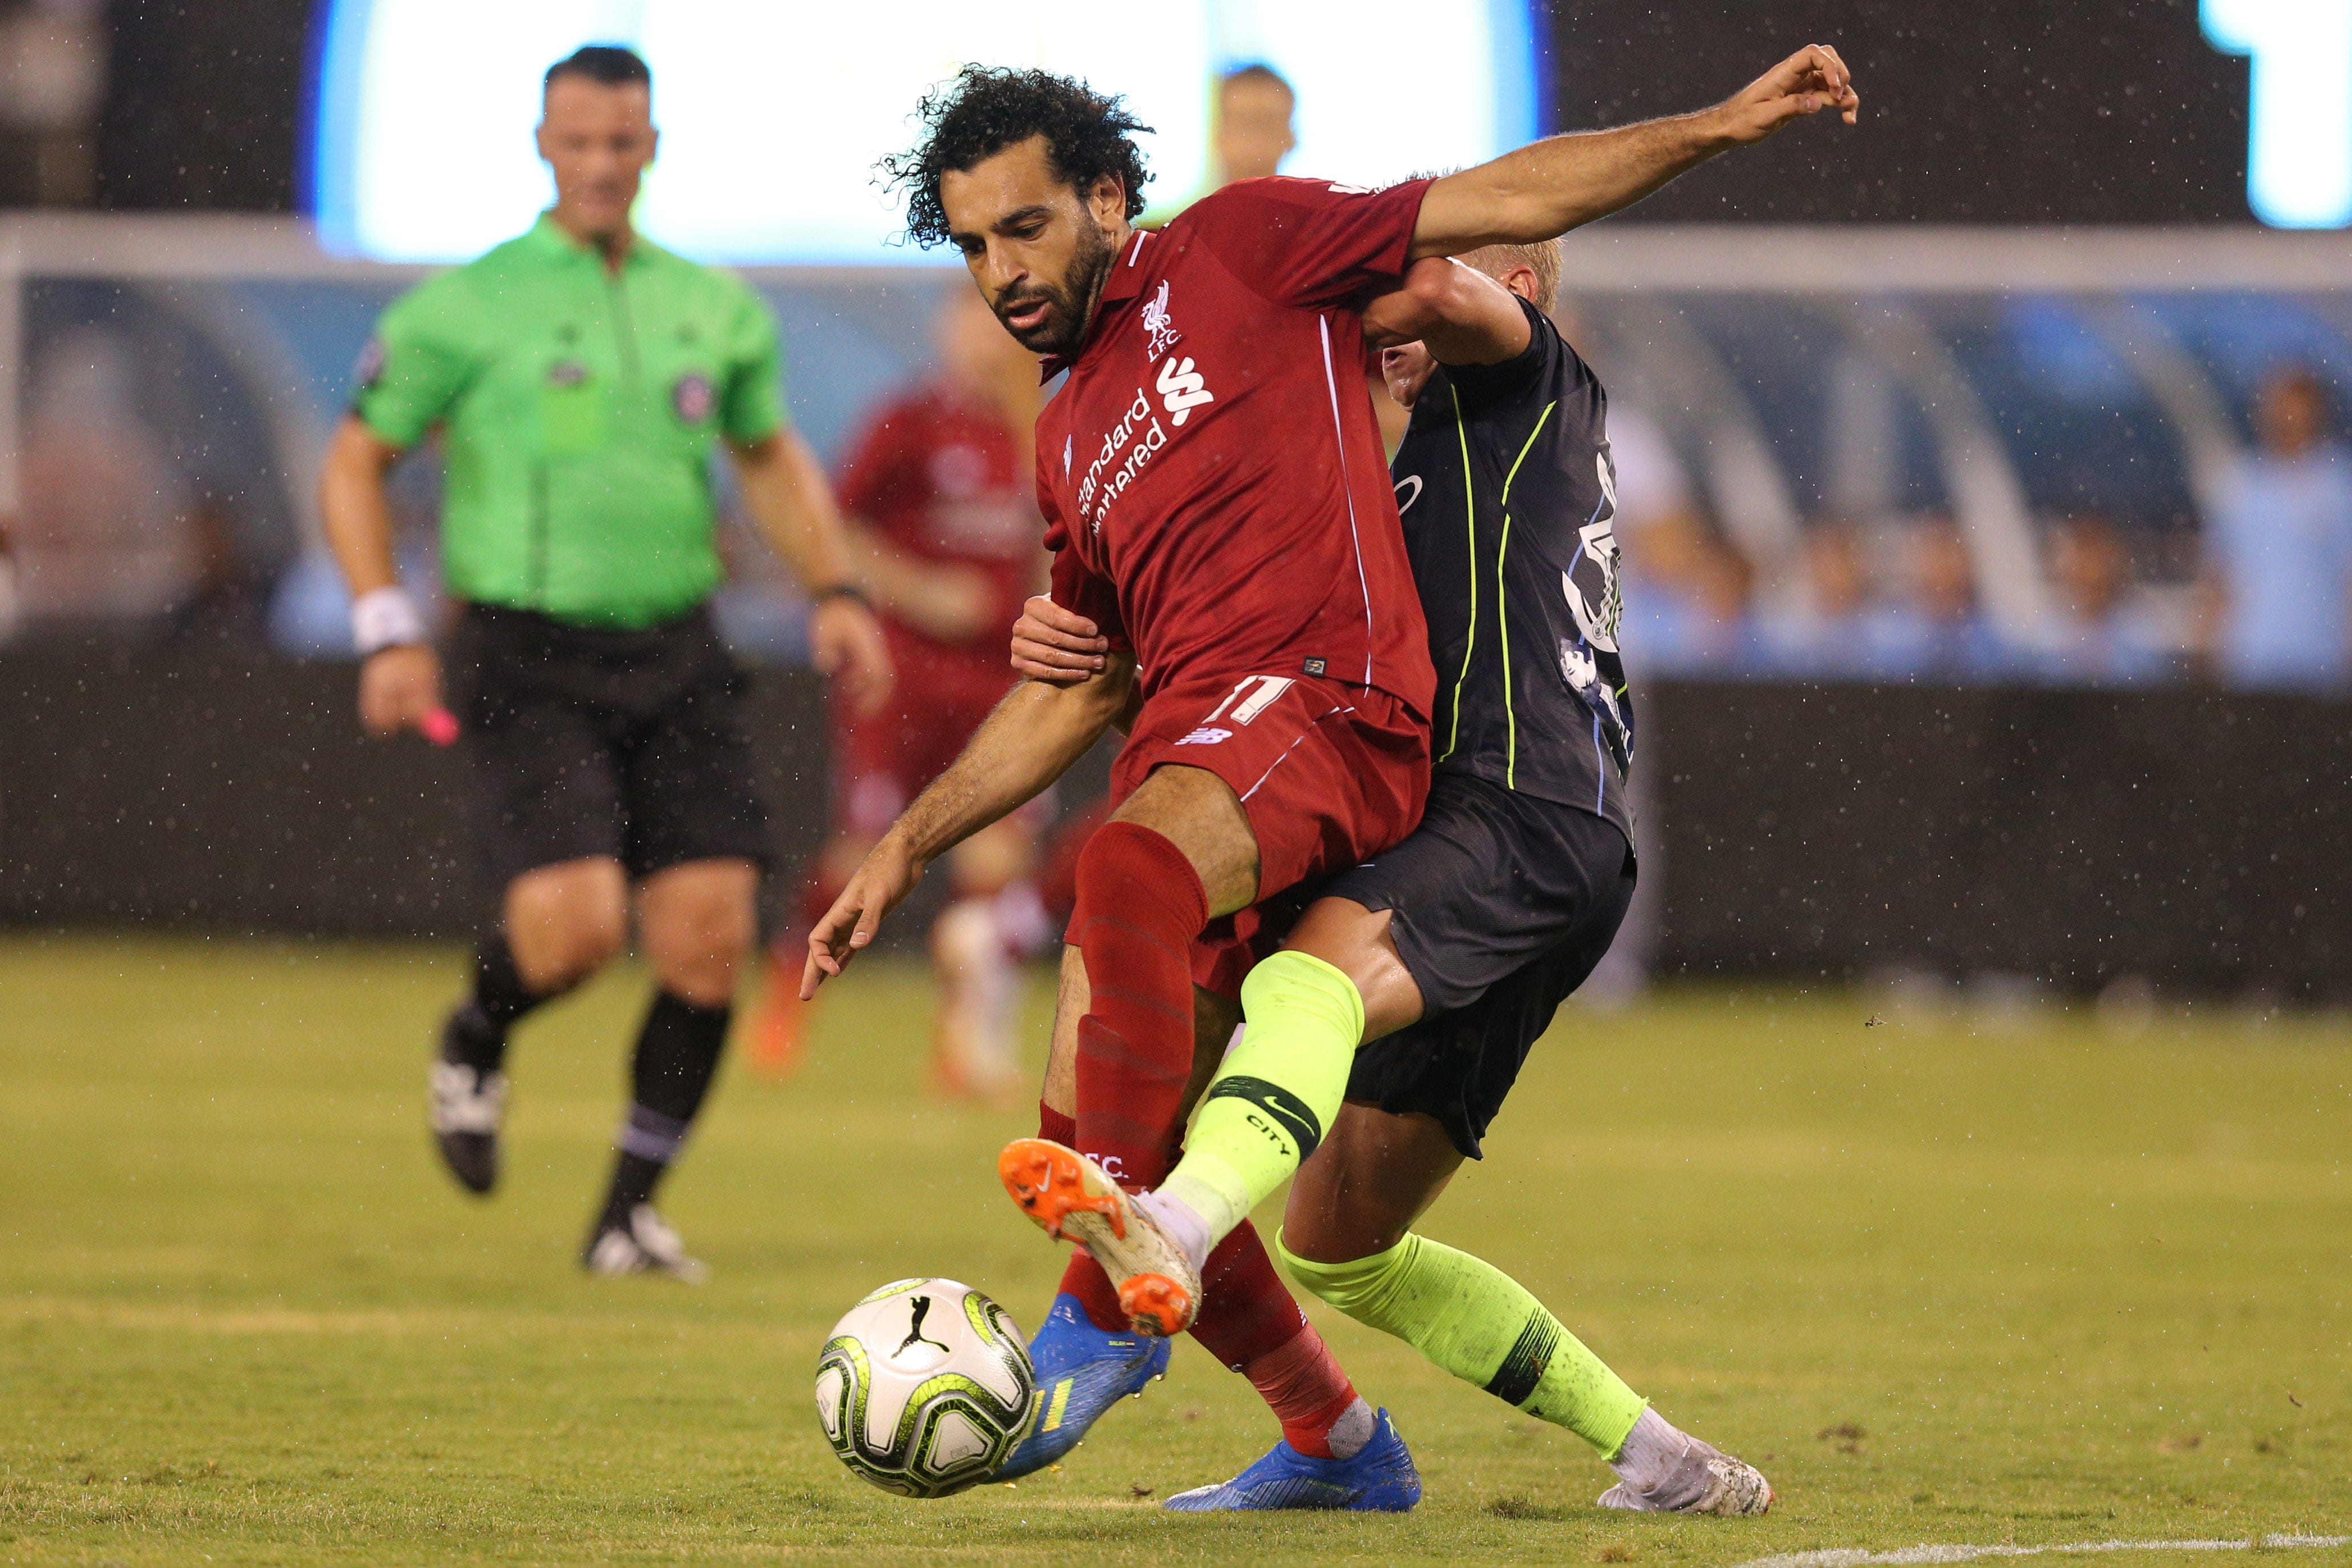 Liverpool forward Mohamed Salah plays the ball against Manchester City midfielder Oleksandr Zinchenko during the second half of an International Champions Cup soccer match at MetLife Stadium in East Rutherford, N.J.